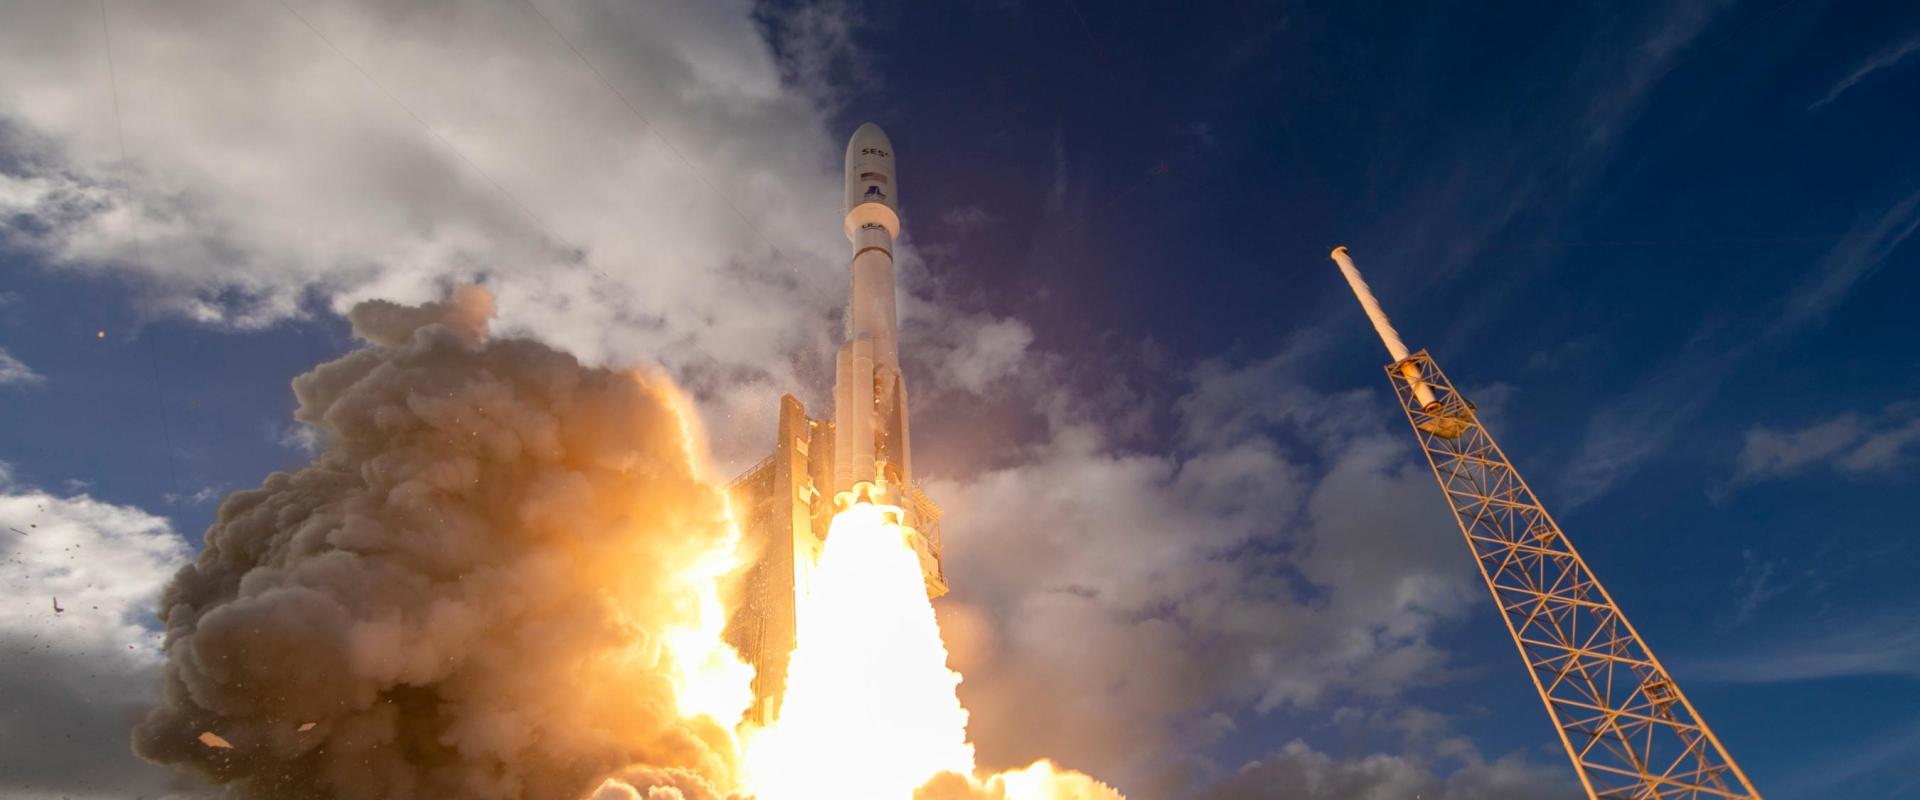 SES launches SES-20 and SES-21